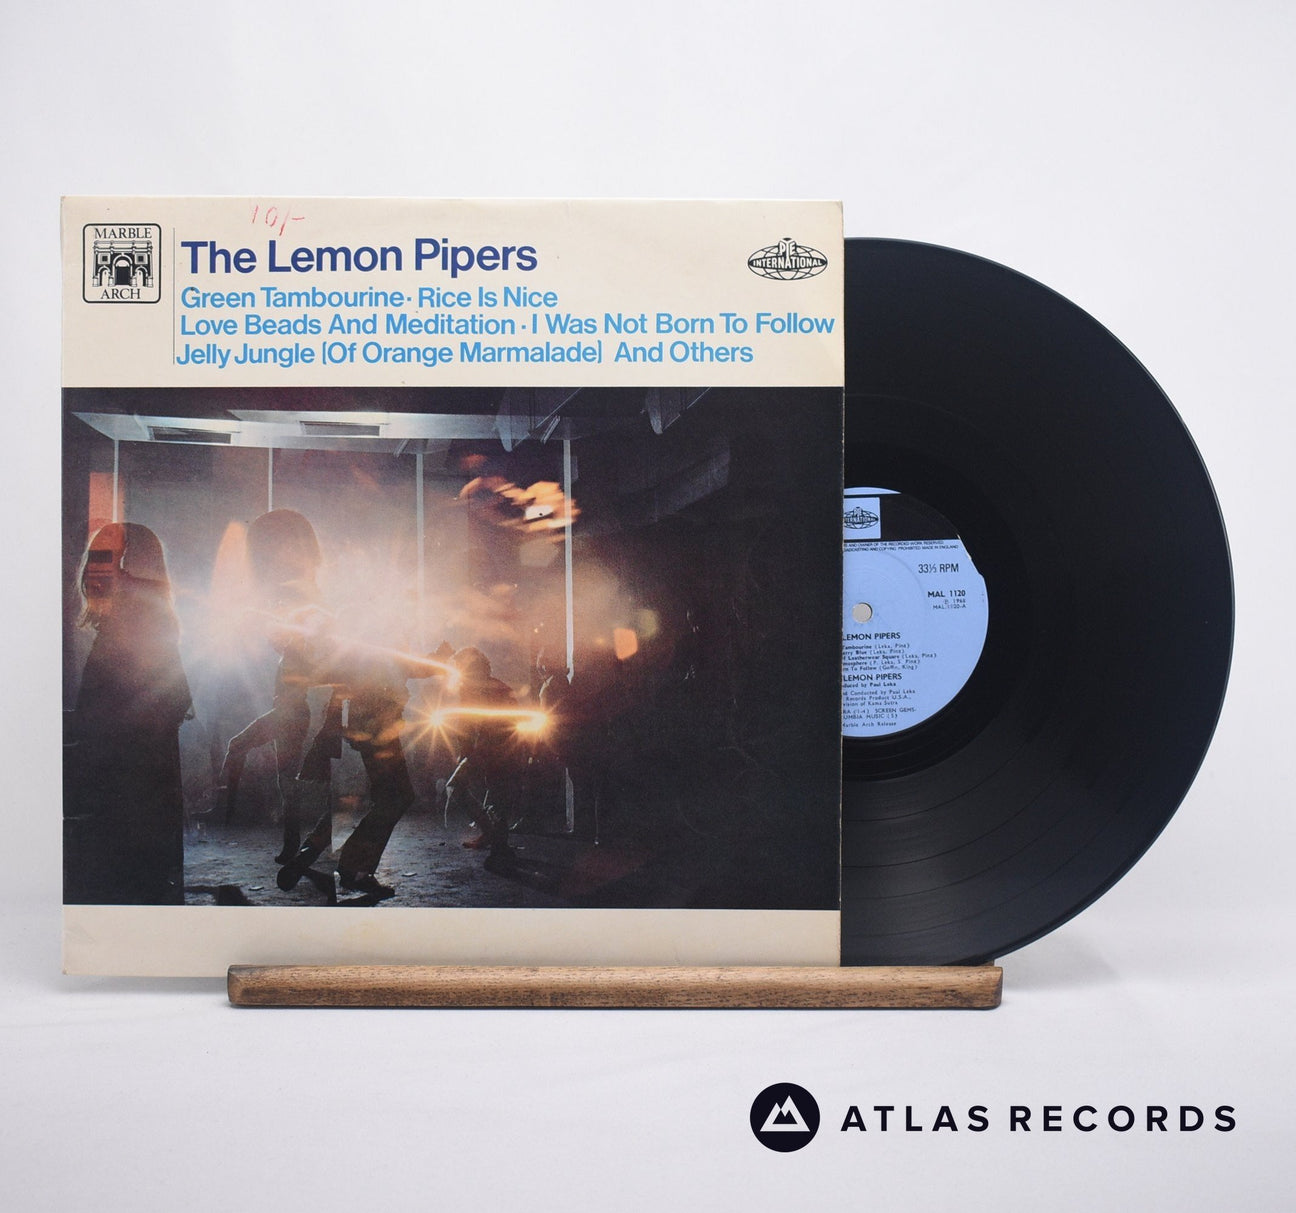 The Lemon Pipers The Lemon Pipers LP Vinyl Record - Front Cover & Record